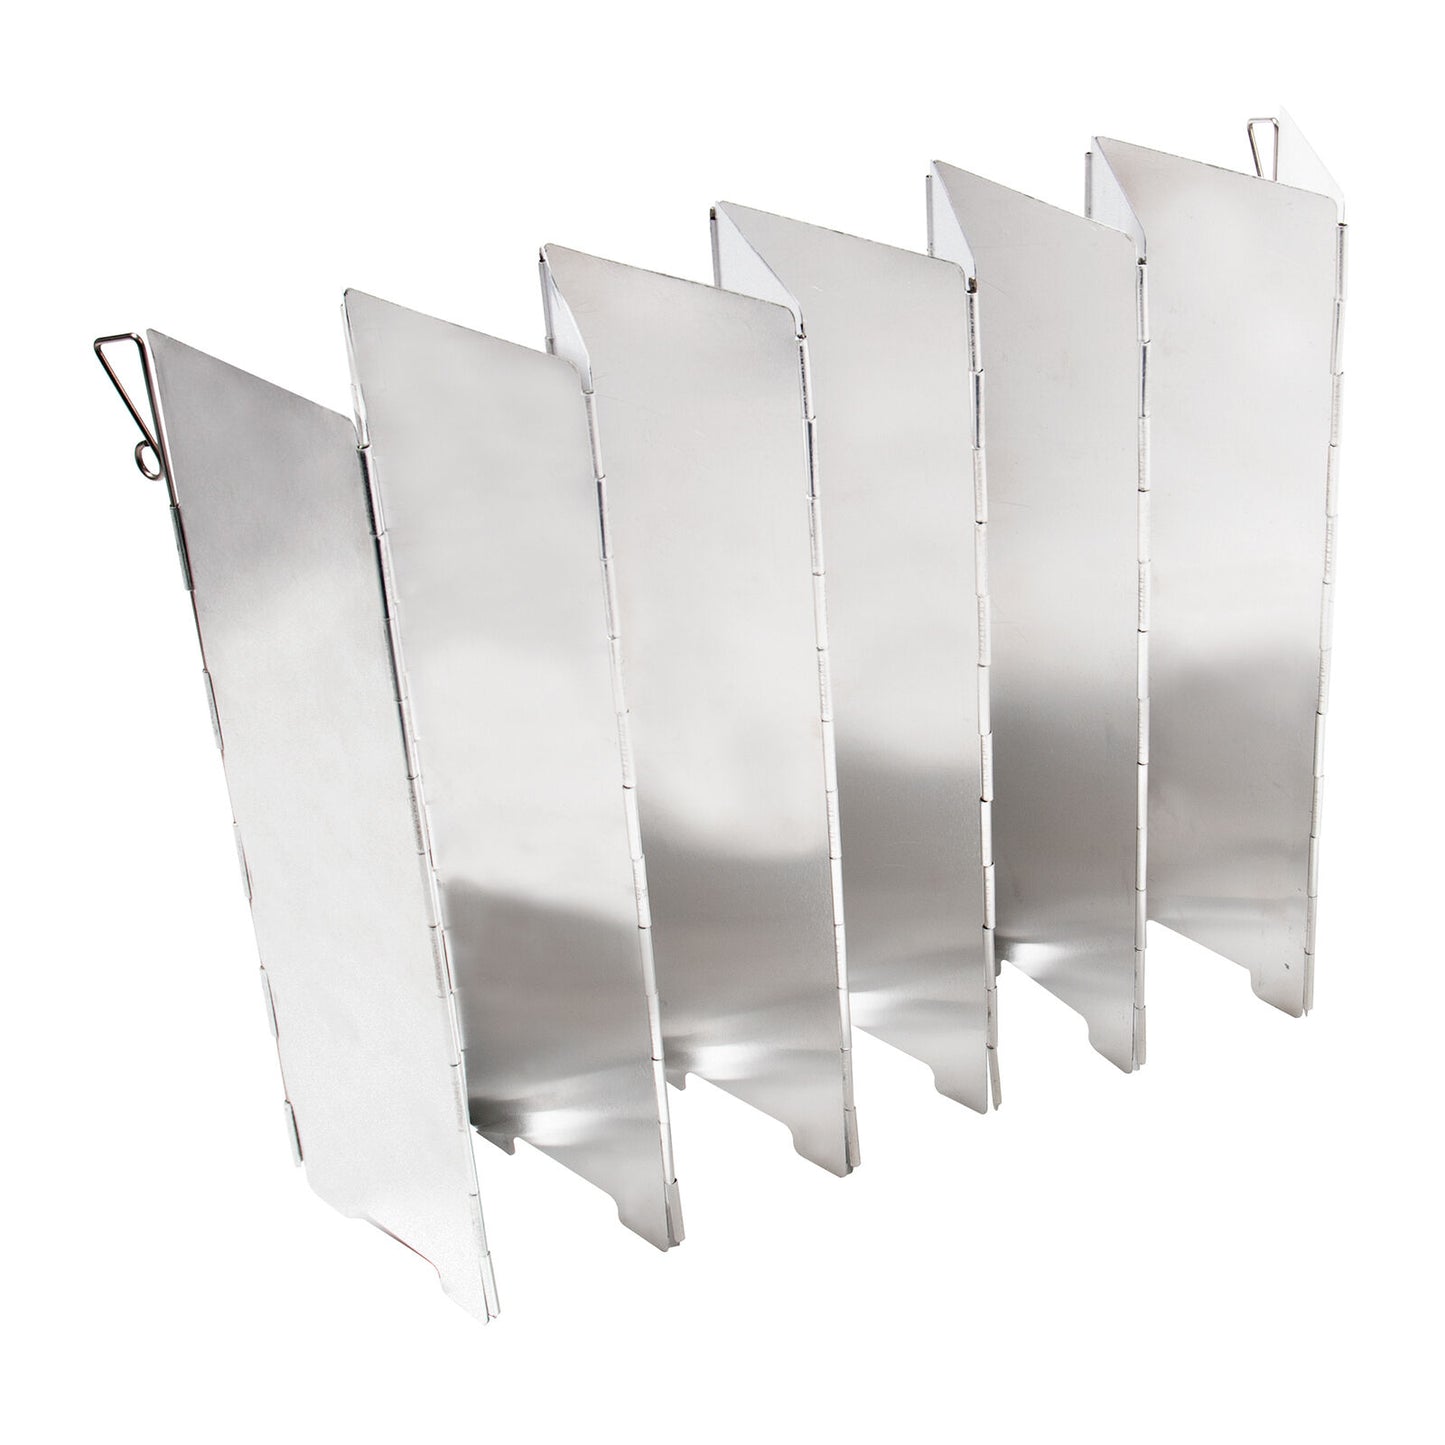 Camp Stove Folding Windscreen - 12 Panels with Two 9 Inch Aluminum Stakes